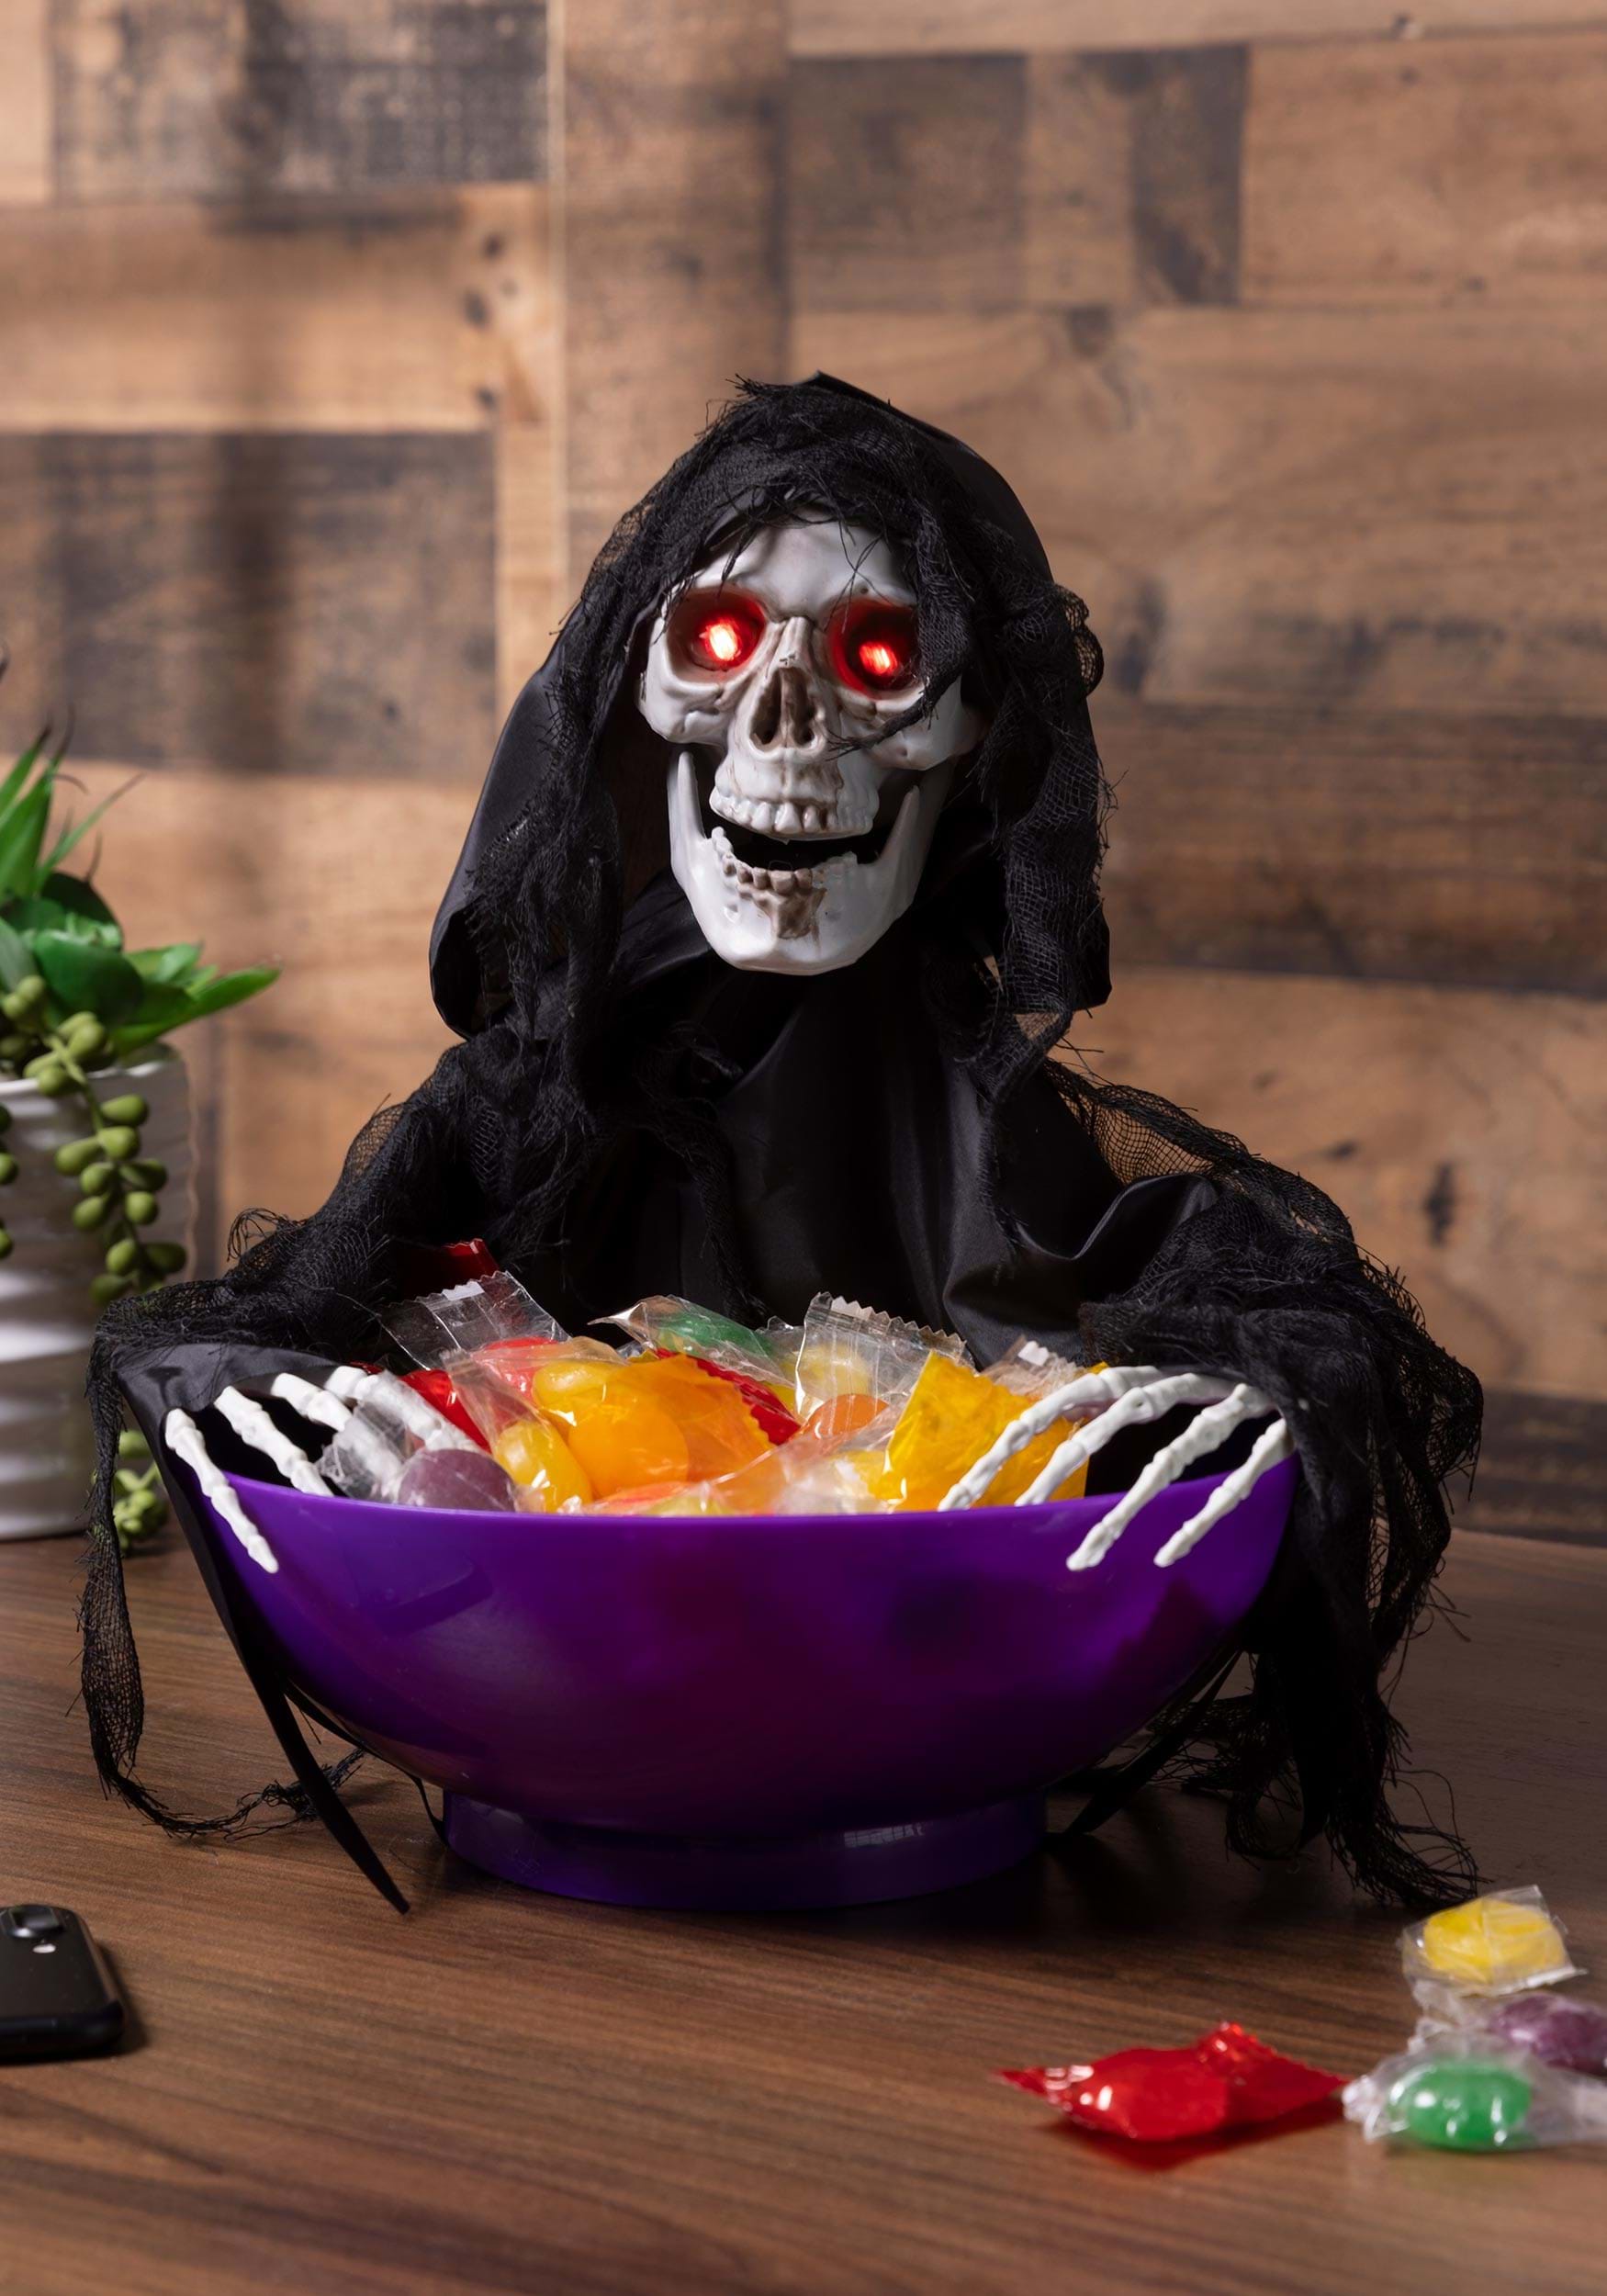 https://images.halloweencostumes.com/products/81336/2-1-279827/shaking-reaper-candy-bowl-alt-5.jpg